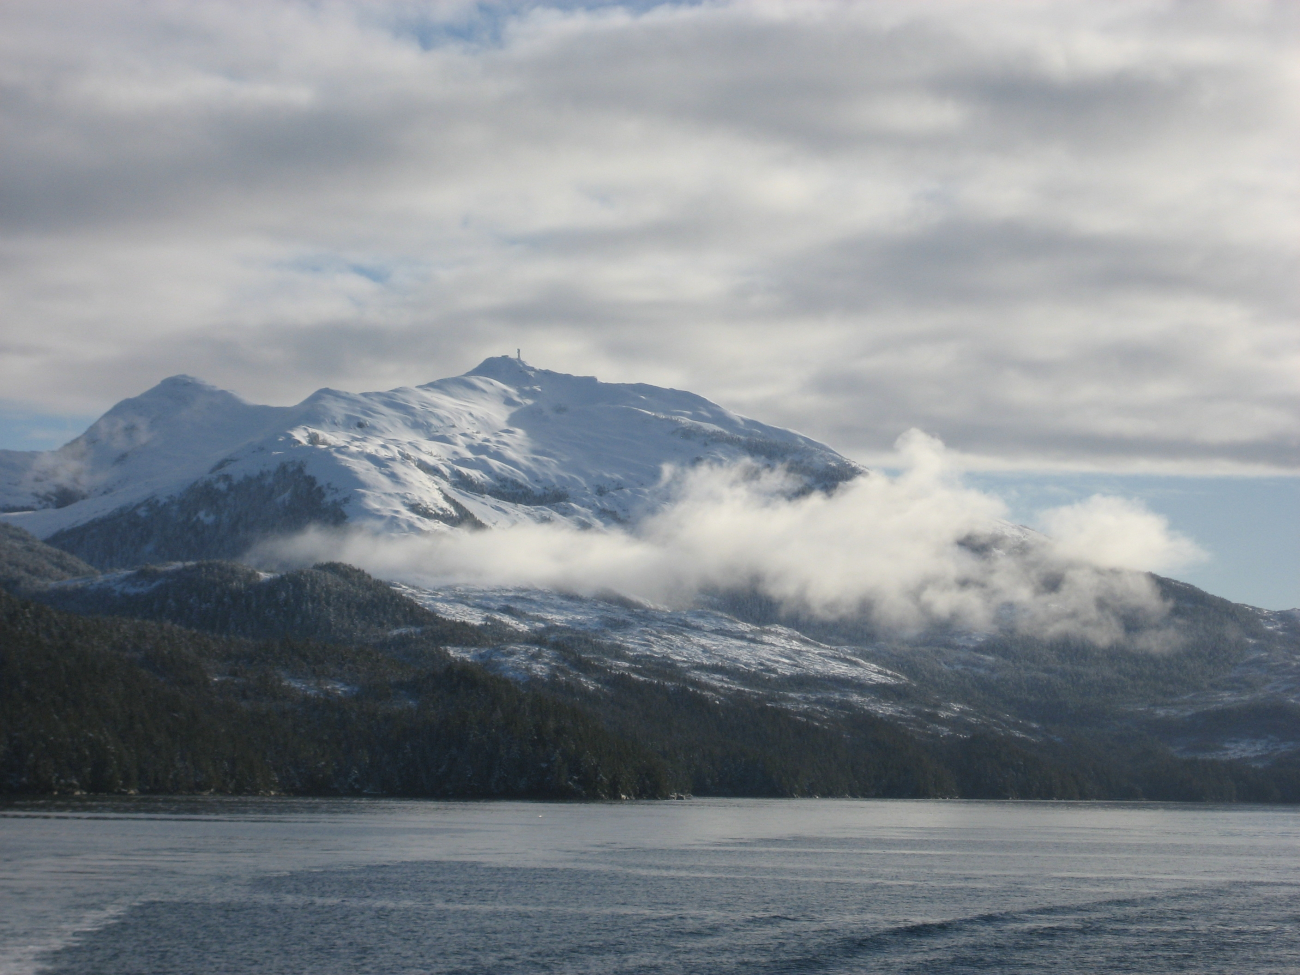 A cold communications tower along the Inside Passage